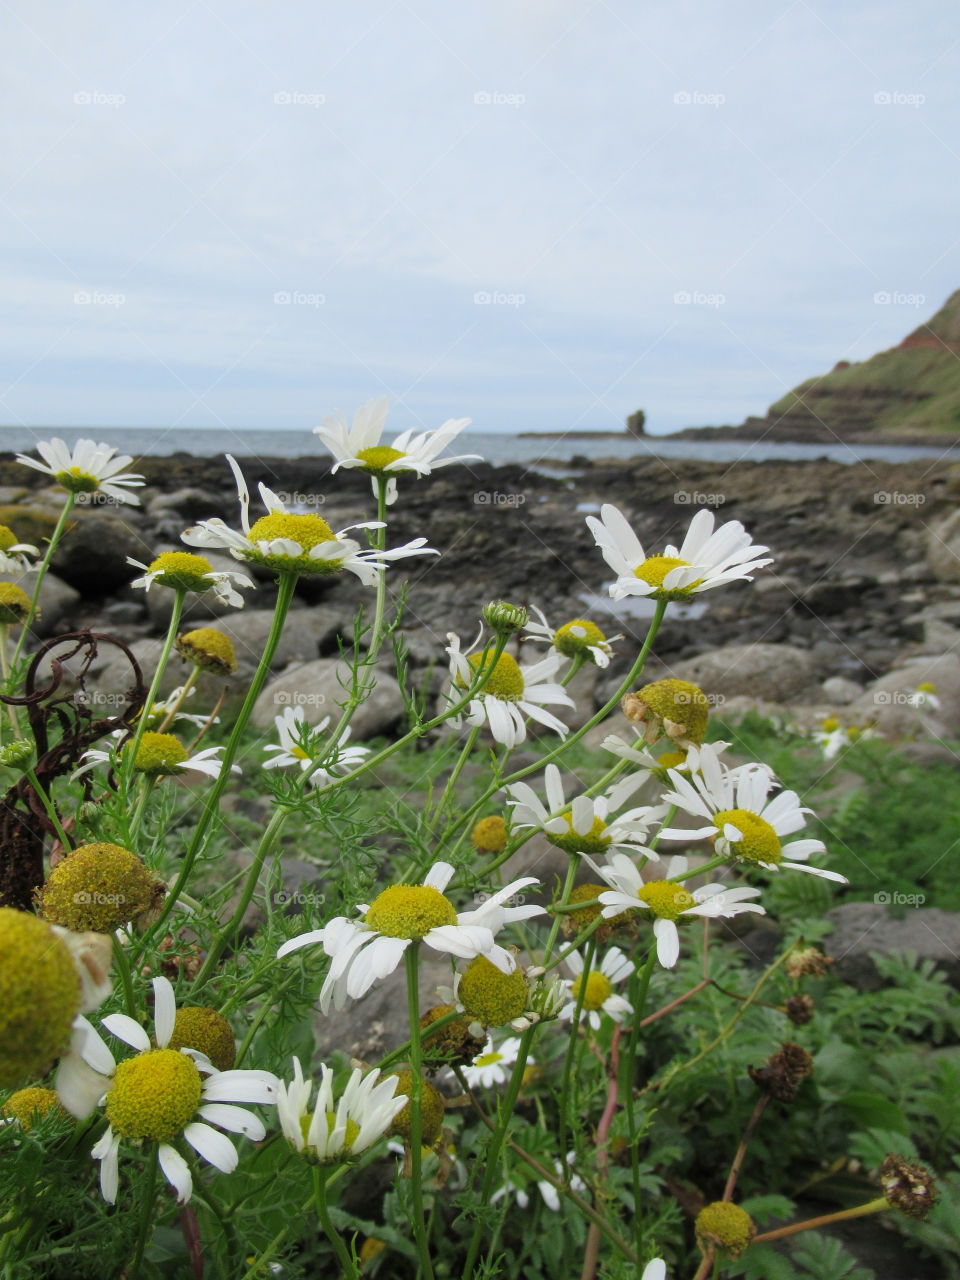 Daisy growing wild at the giants causeway